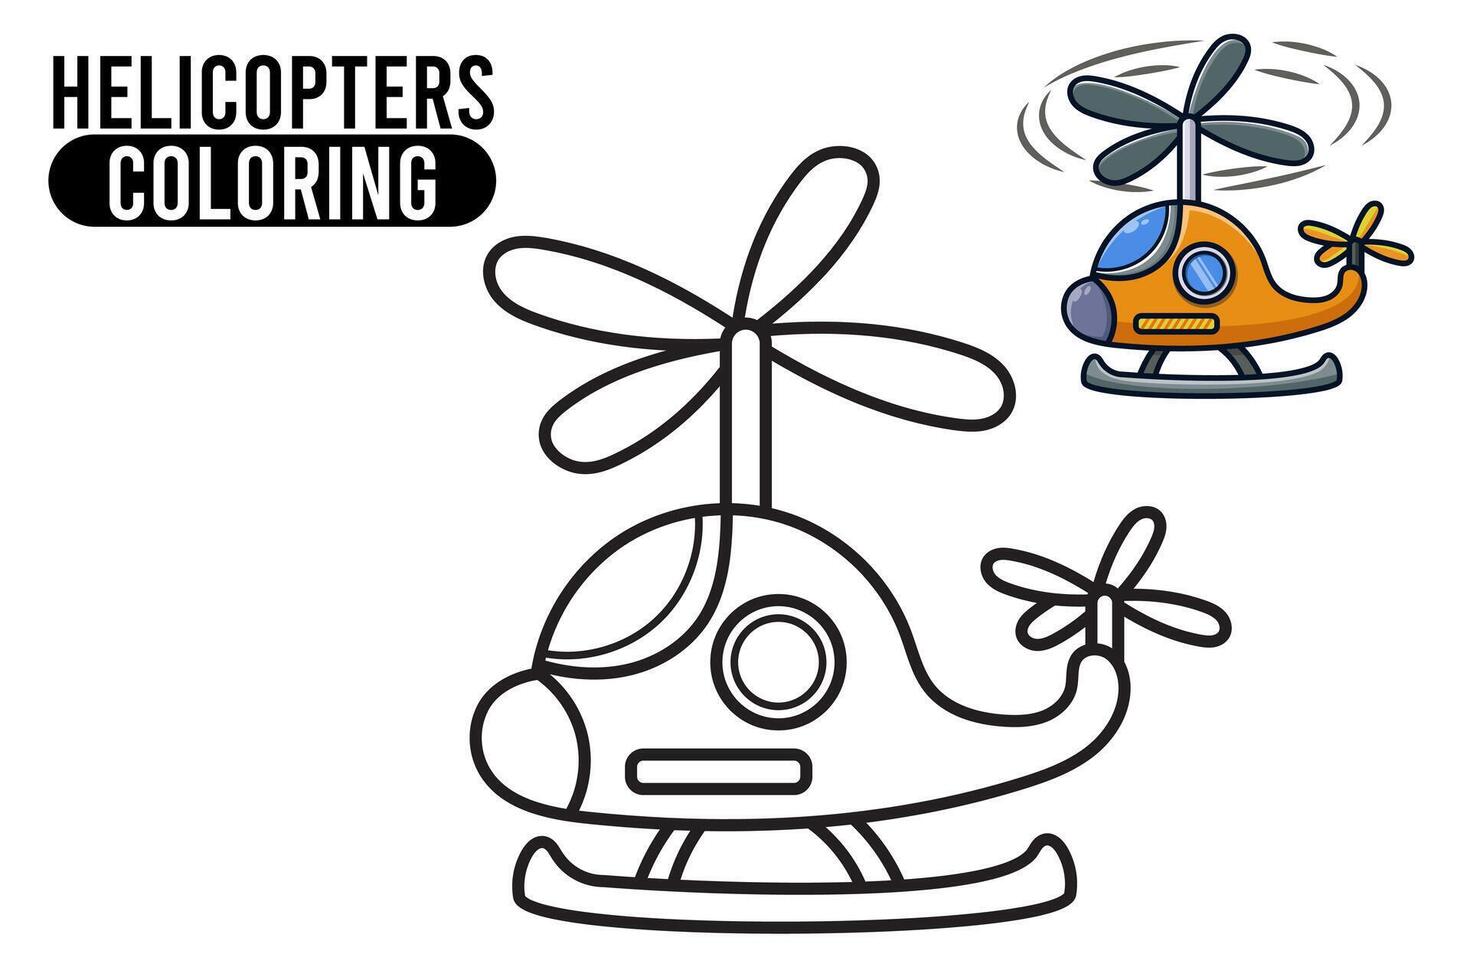 Coloring Page Outline Of cartoon helicopters. Professional transport. Coloring Book for kids. outline vector illustration isolated on white